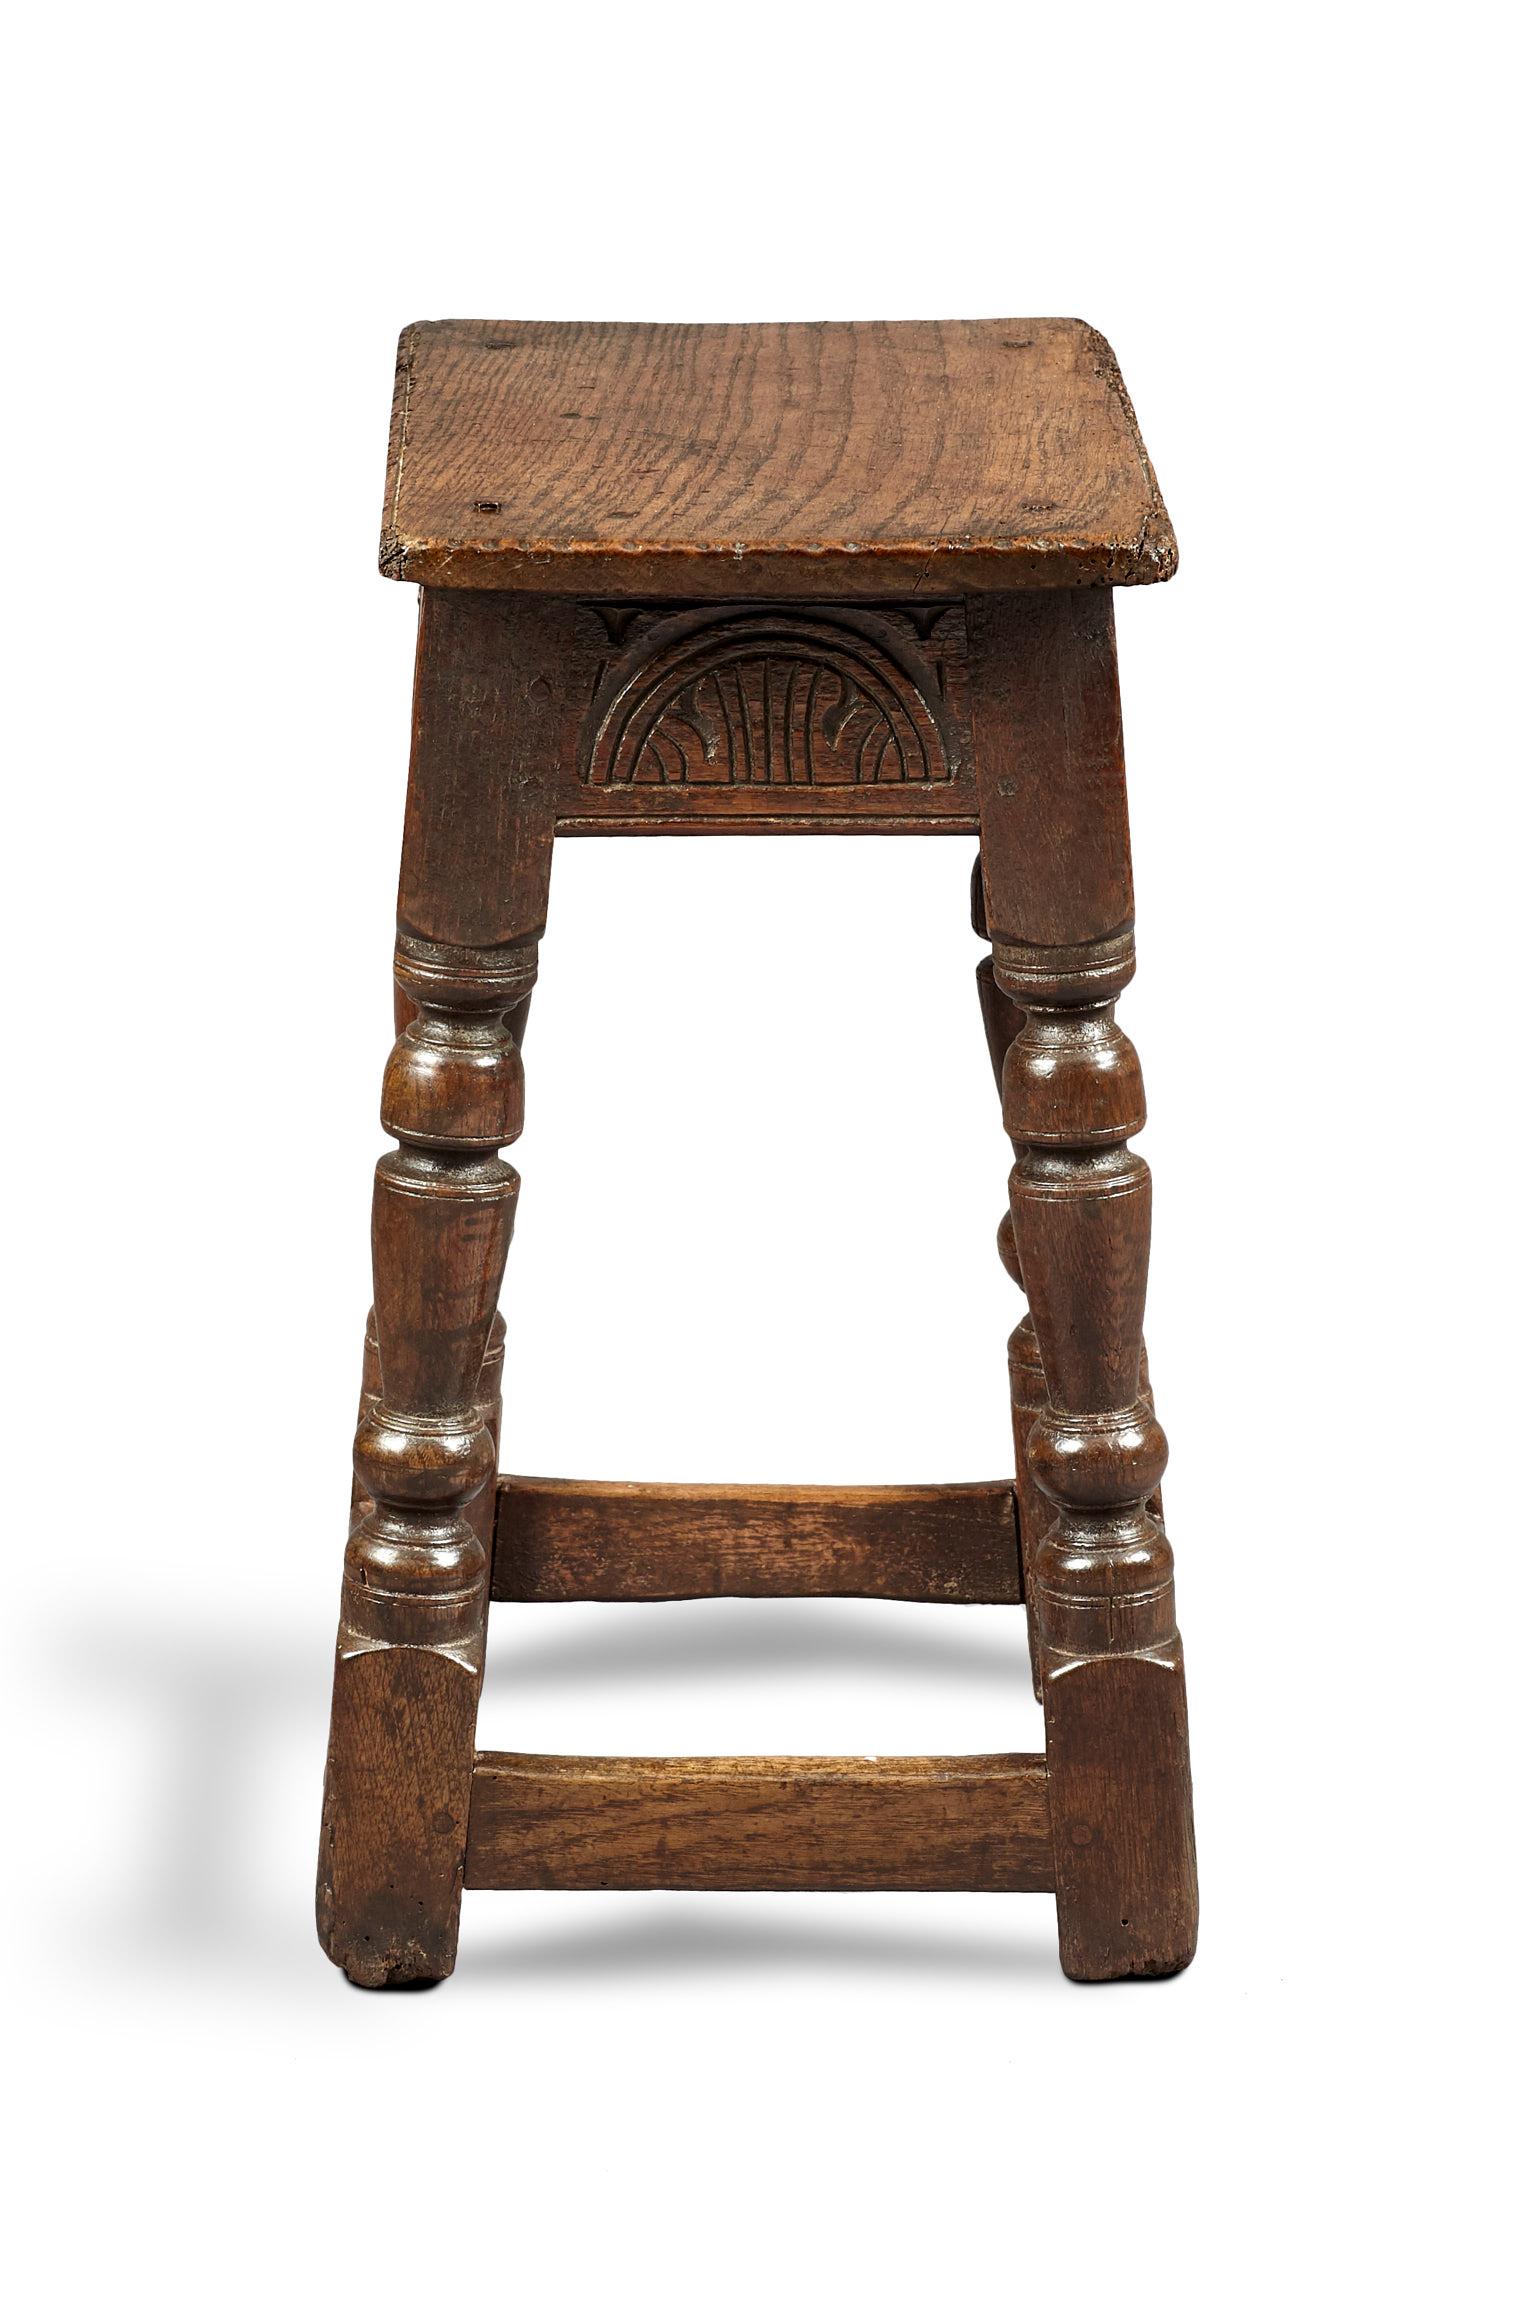 Two Charles I Oak Joined Stools, English, Gloucestershire, circa 1630-1640 For Sale 4